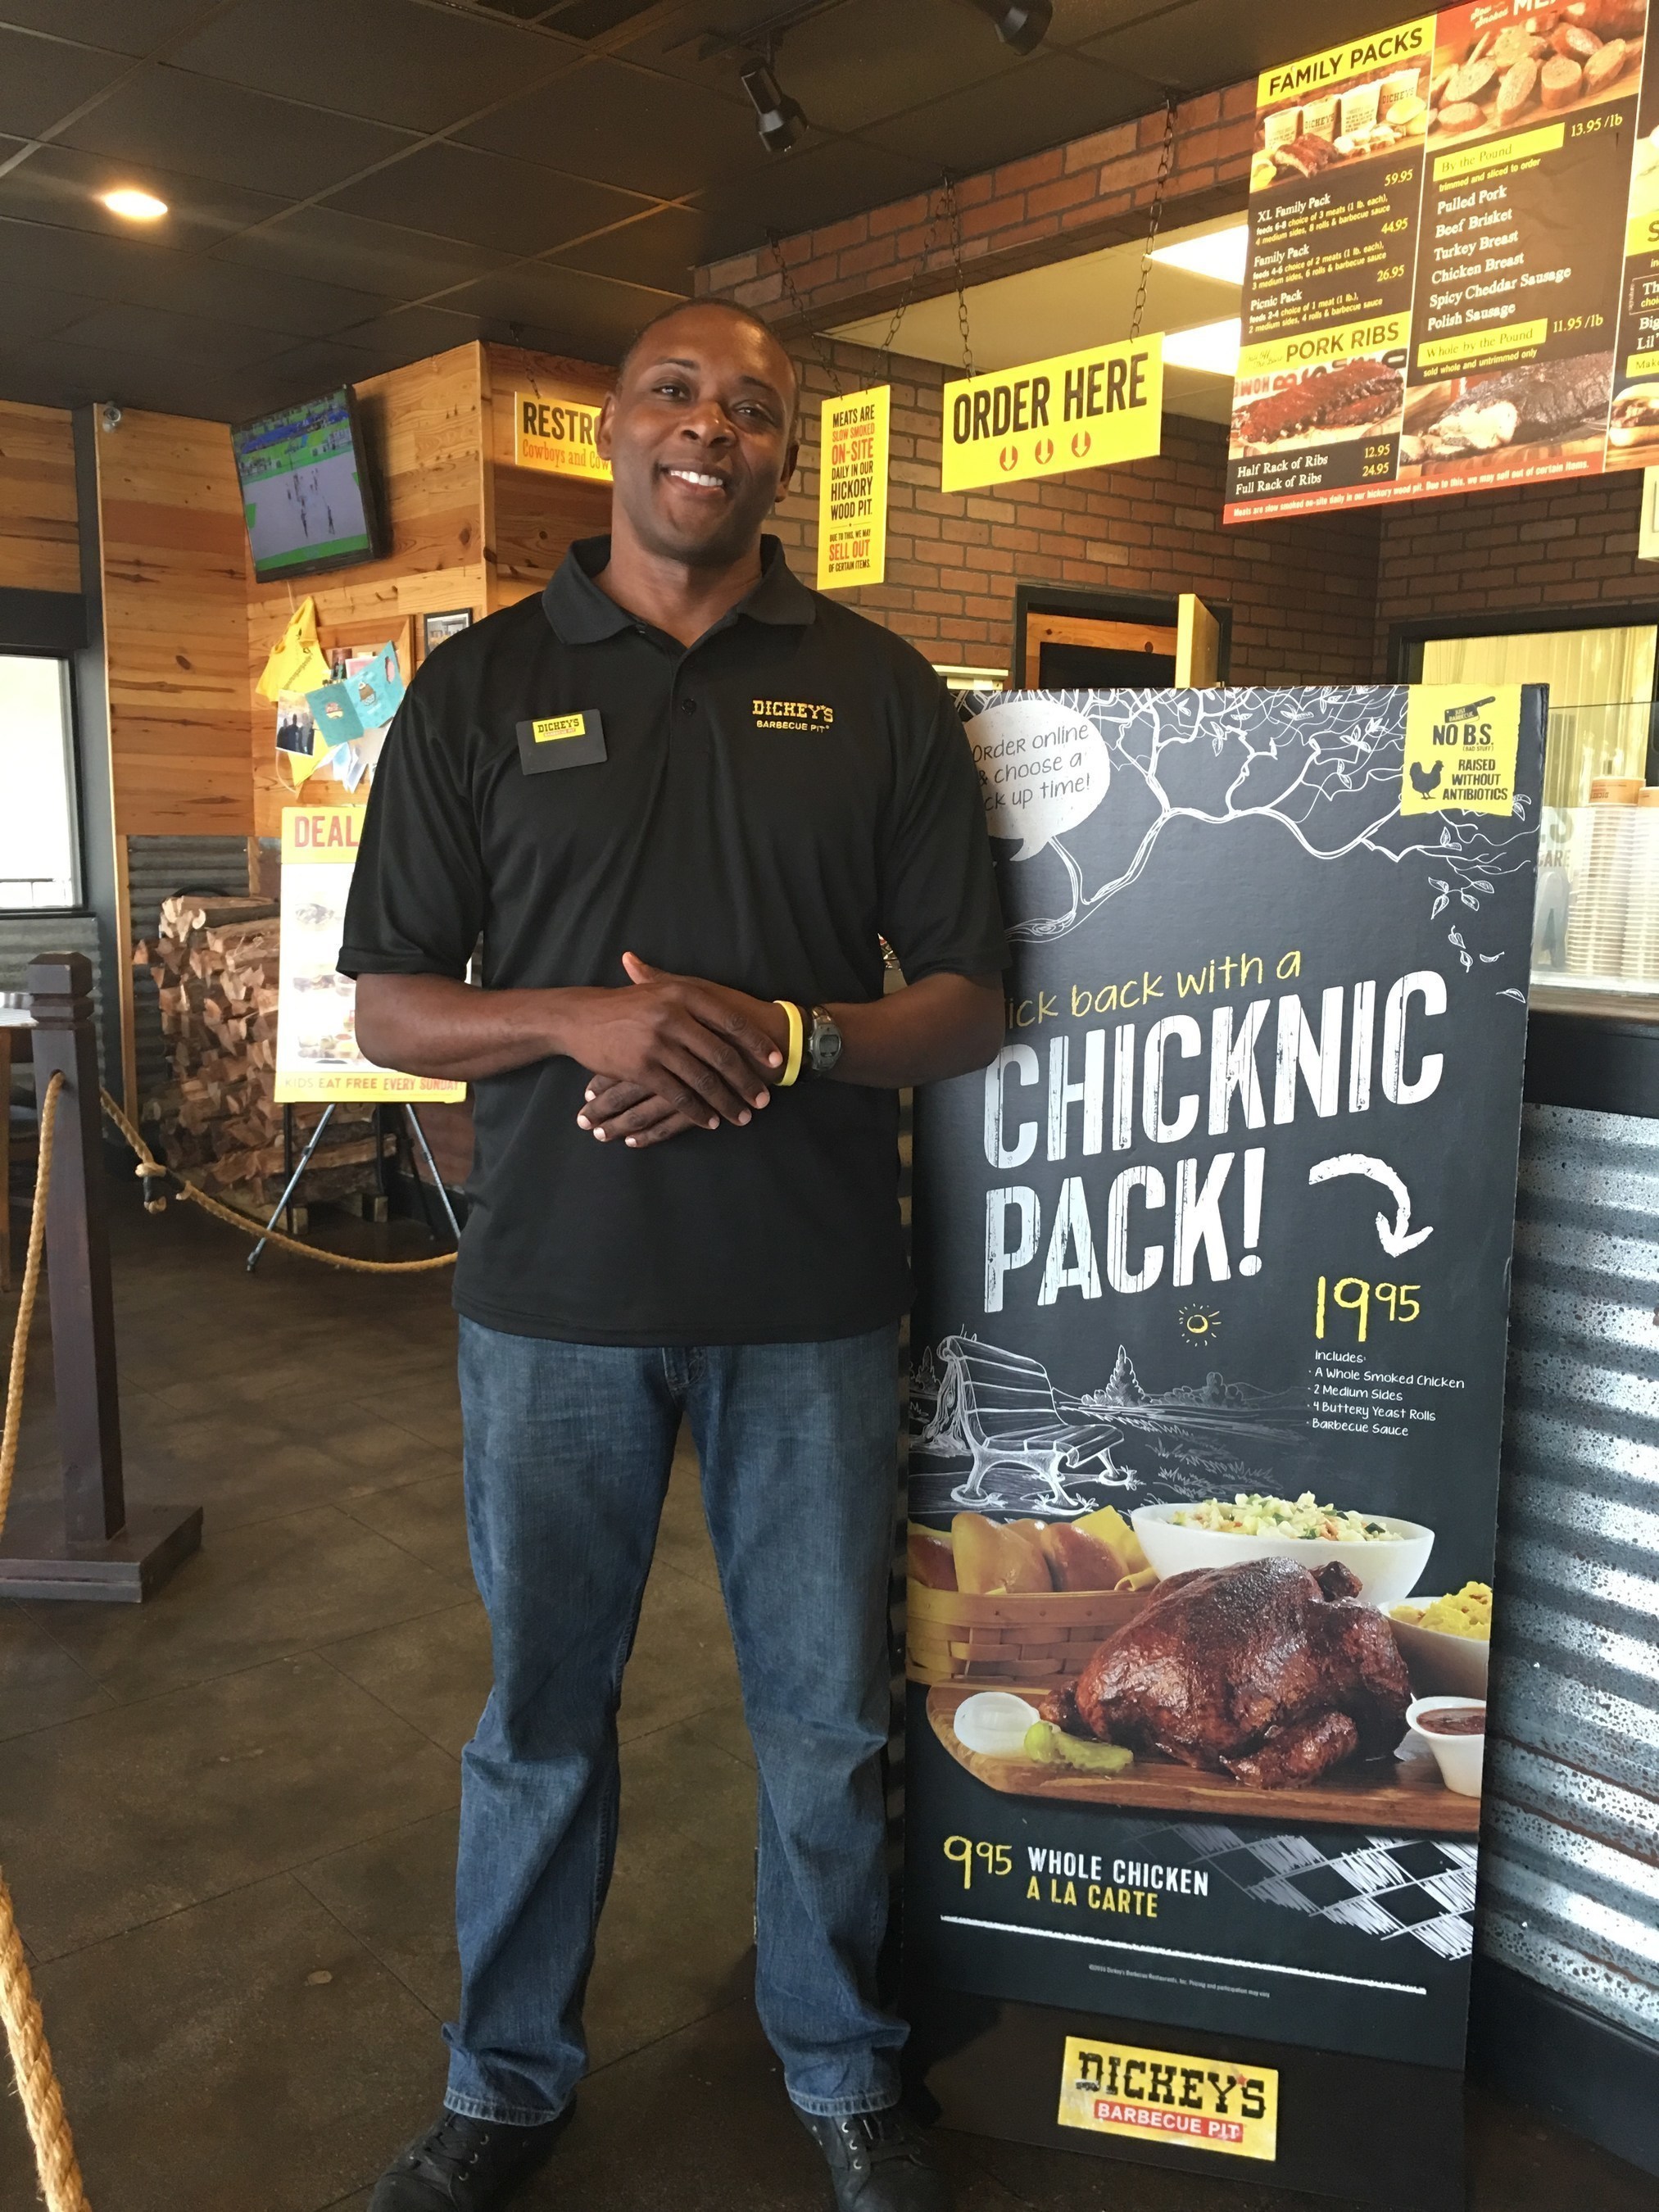 Robert Dunning, Owner/Operator of Dickey's Barbecue Pit in Metairie